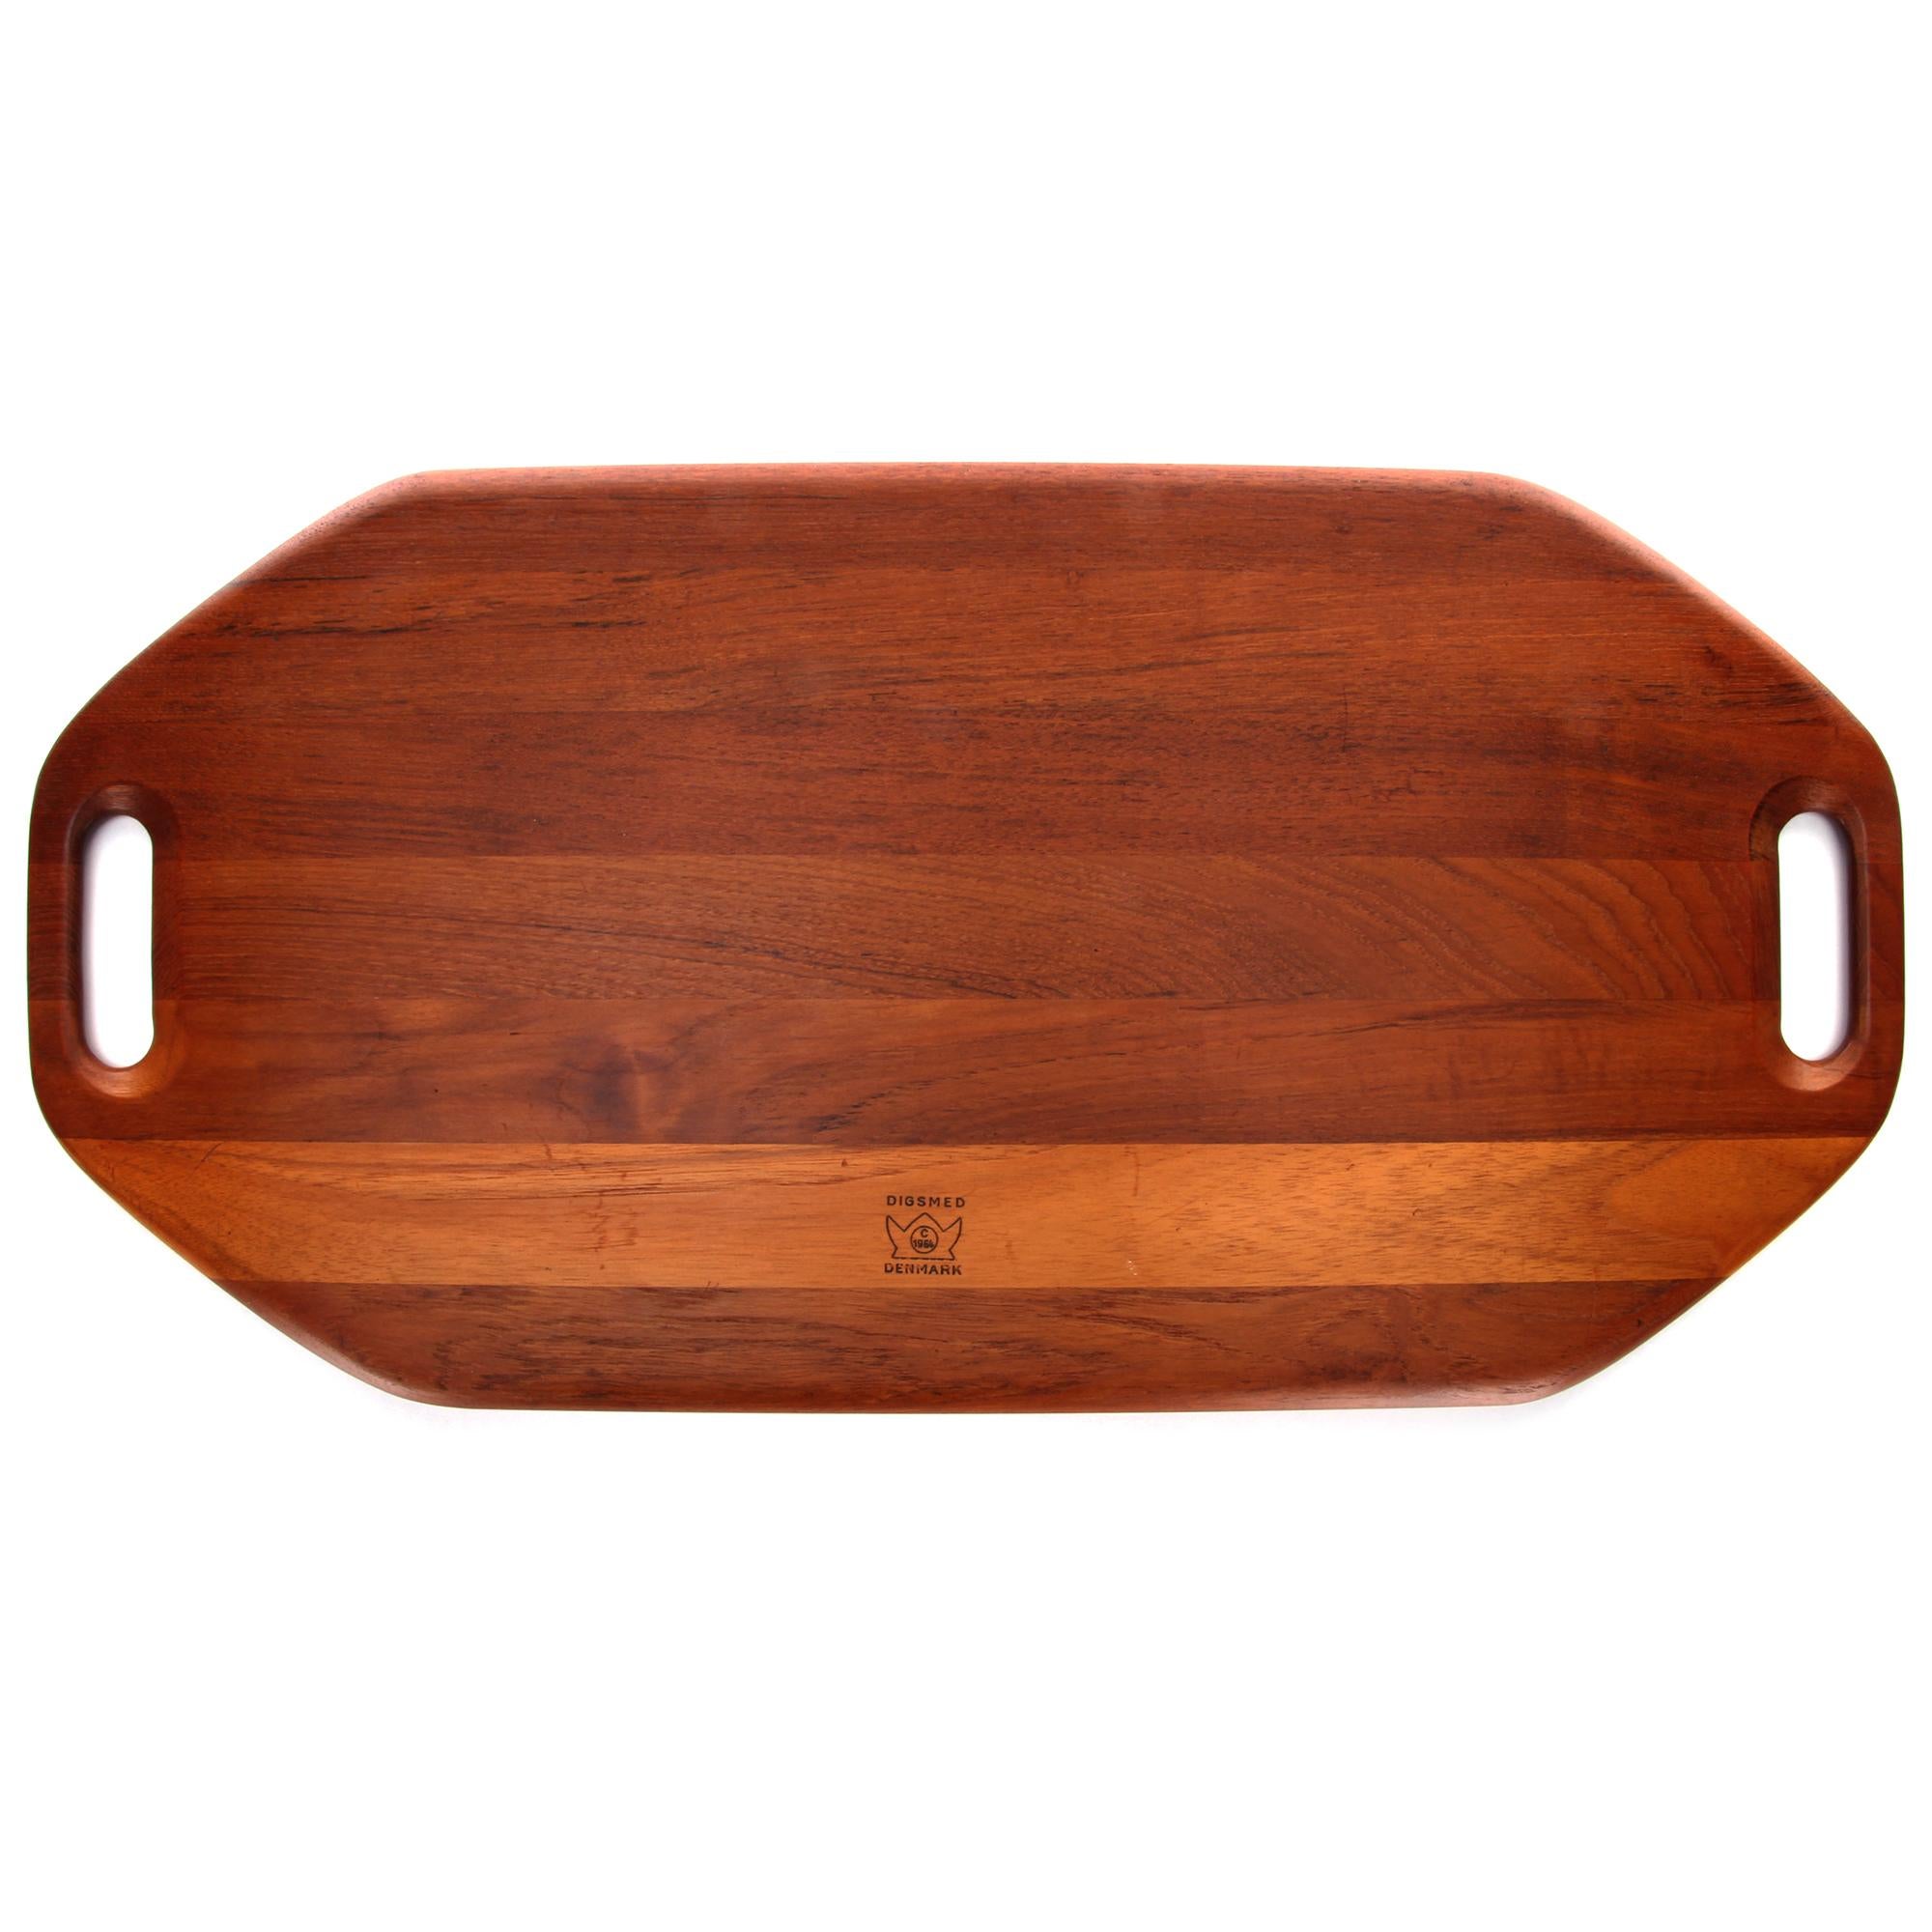 Teak Tray by Digsmed 1964, Large Danish Modern Severing Tray 3